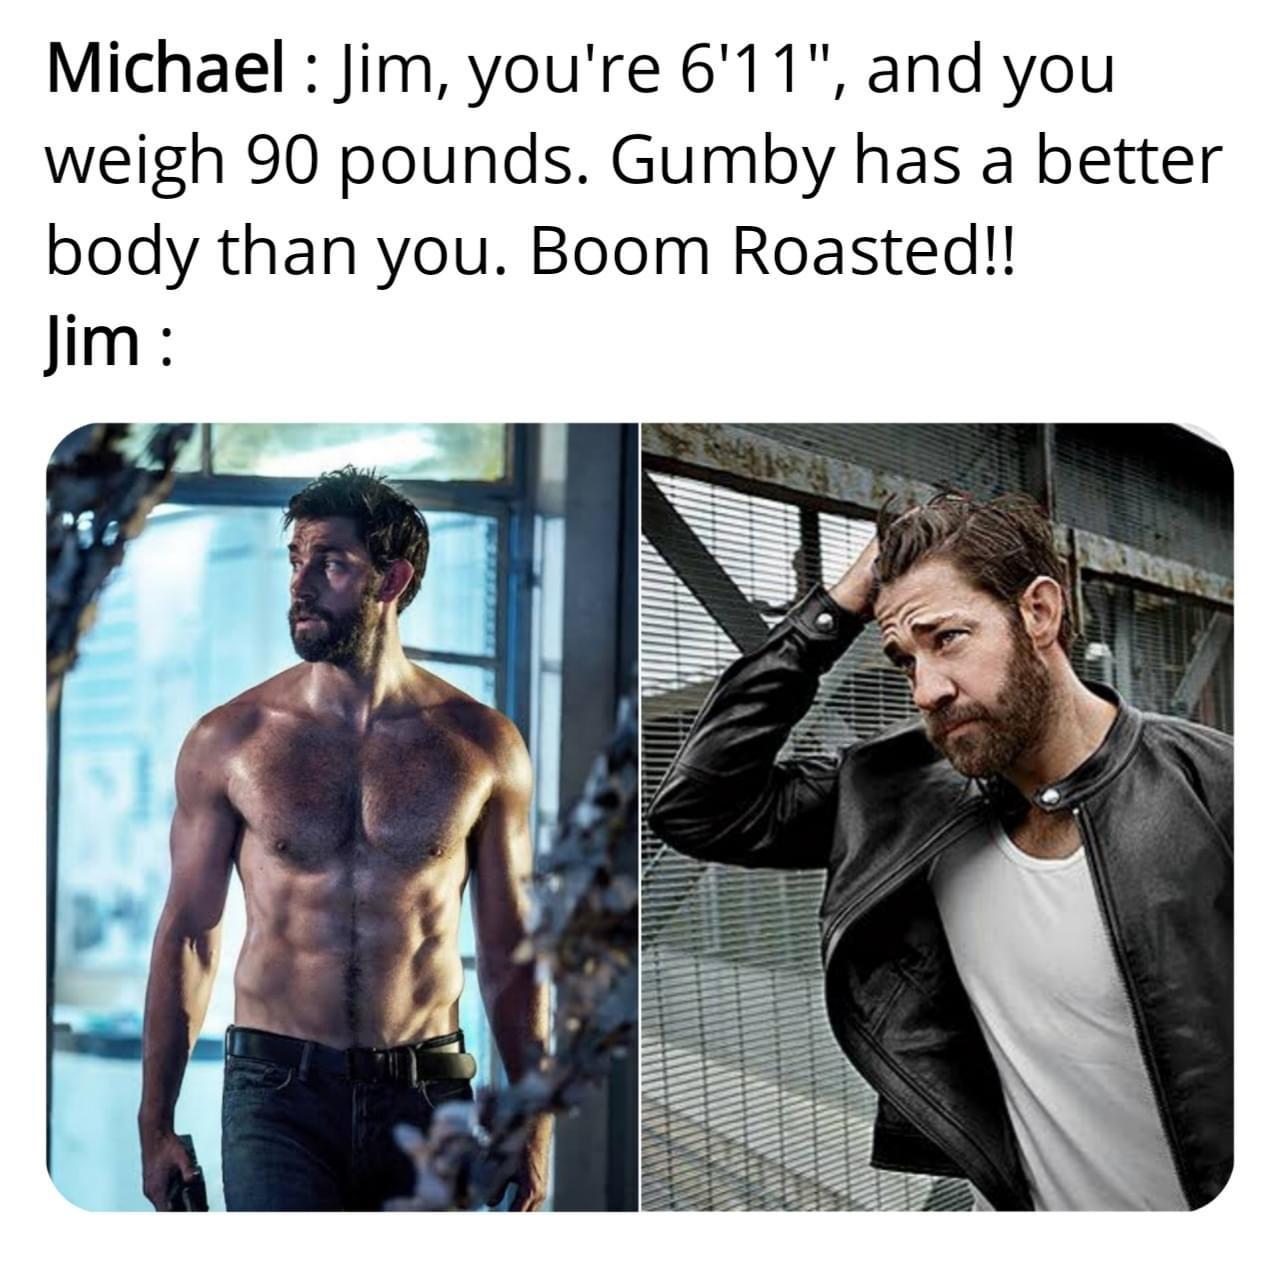 The Office memes - muscle - a Michael Jim, you're 6'11